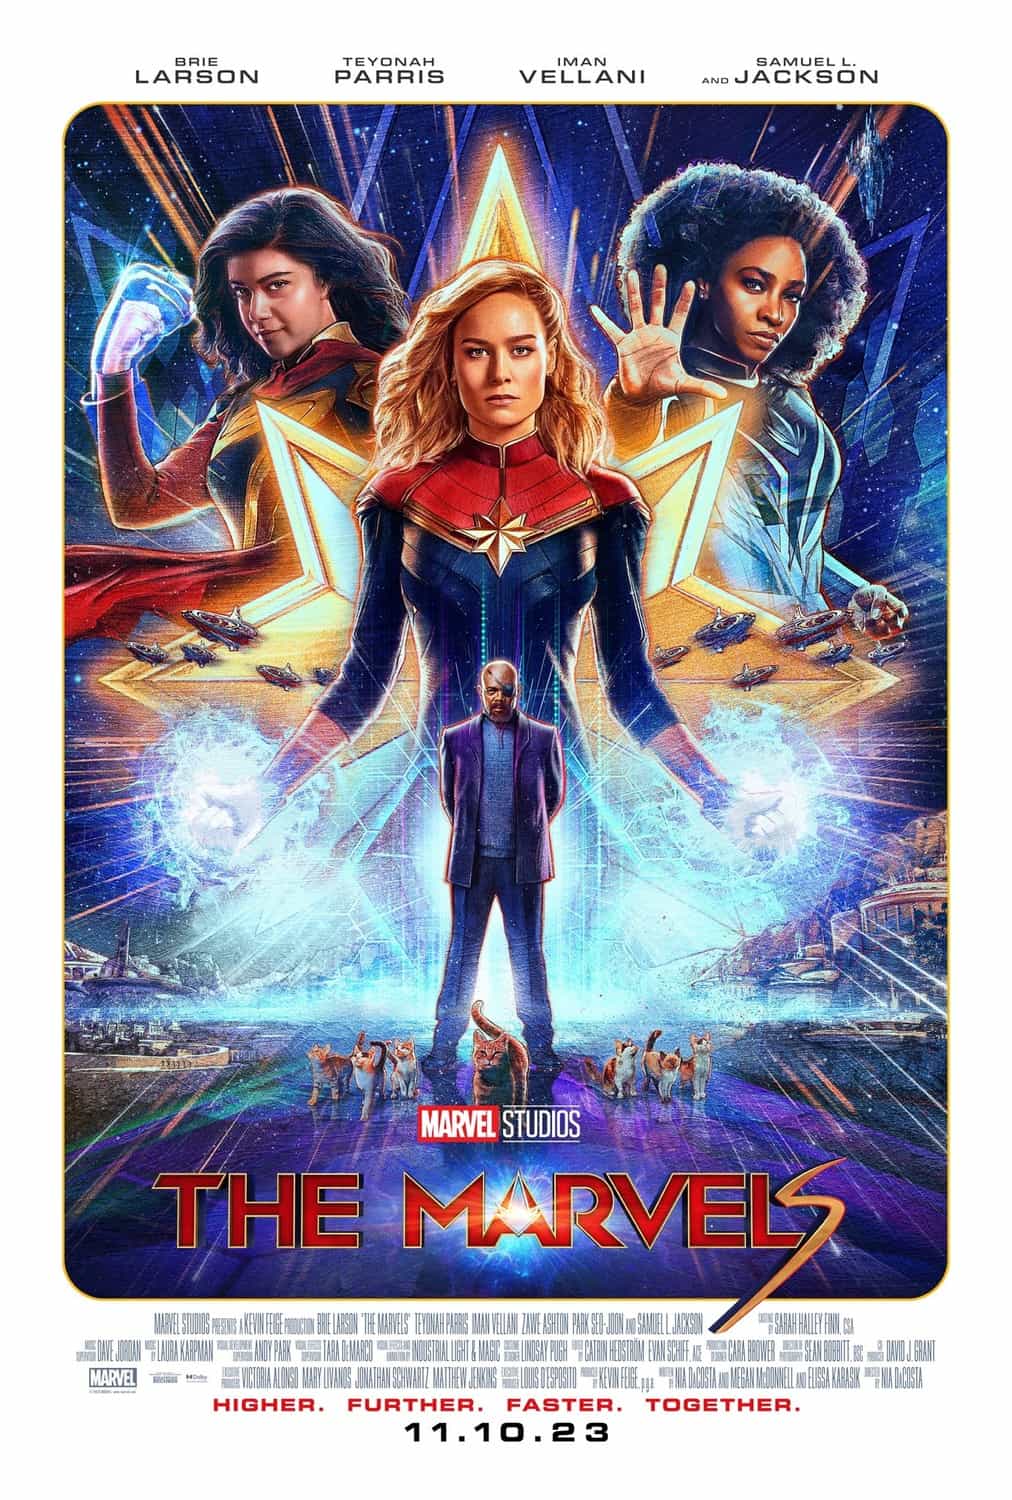 Check out the new trailer for upcoming movie The Marvels which stars Brie Larson and Teyonah Parris - movie UK release date 10th November 2023 #themarvels